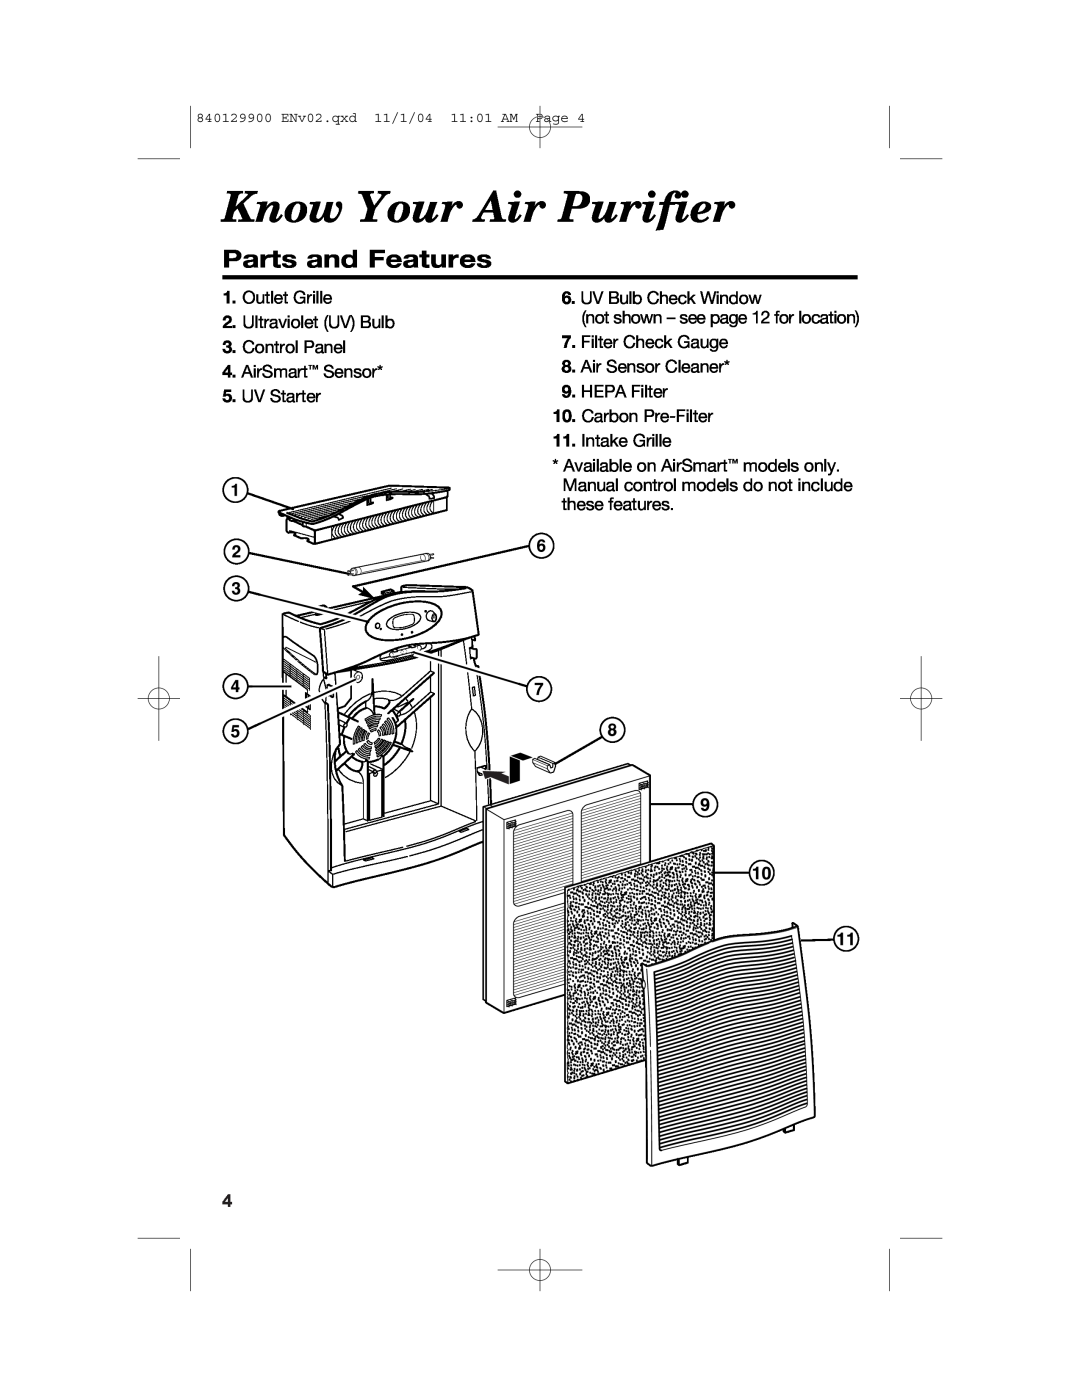 Hamilton Beach 04160, 04162, 04161 manual Know Your Air Purifier, Parts and Features 